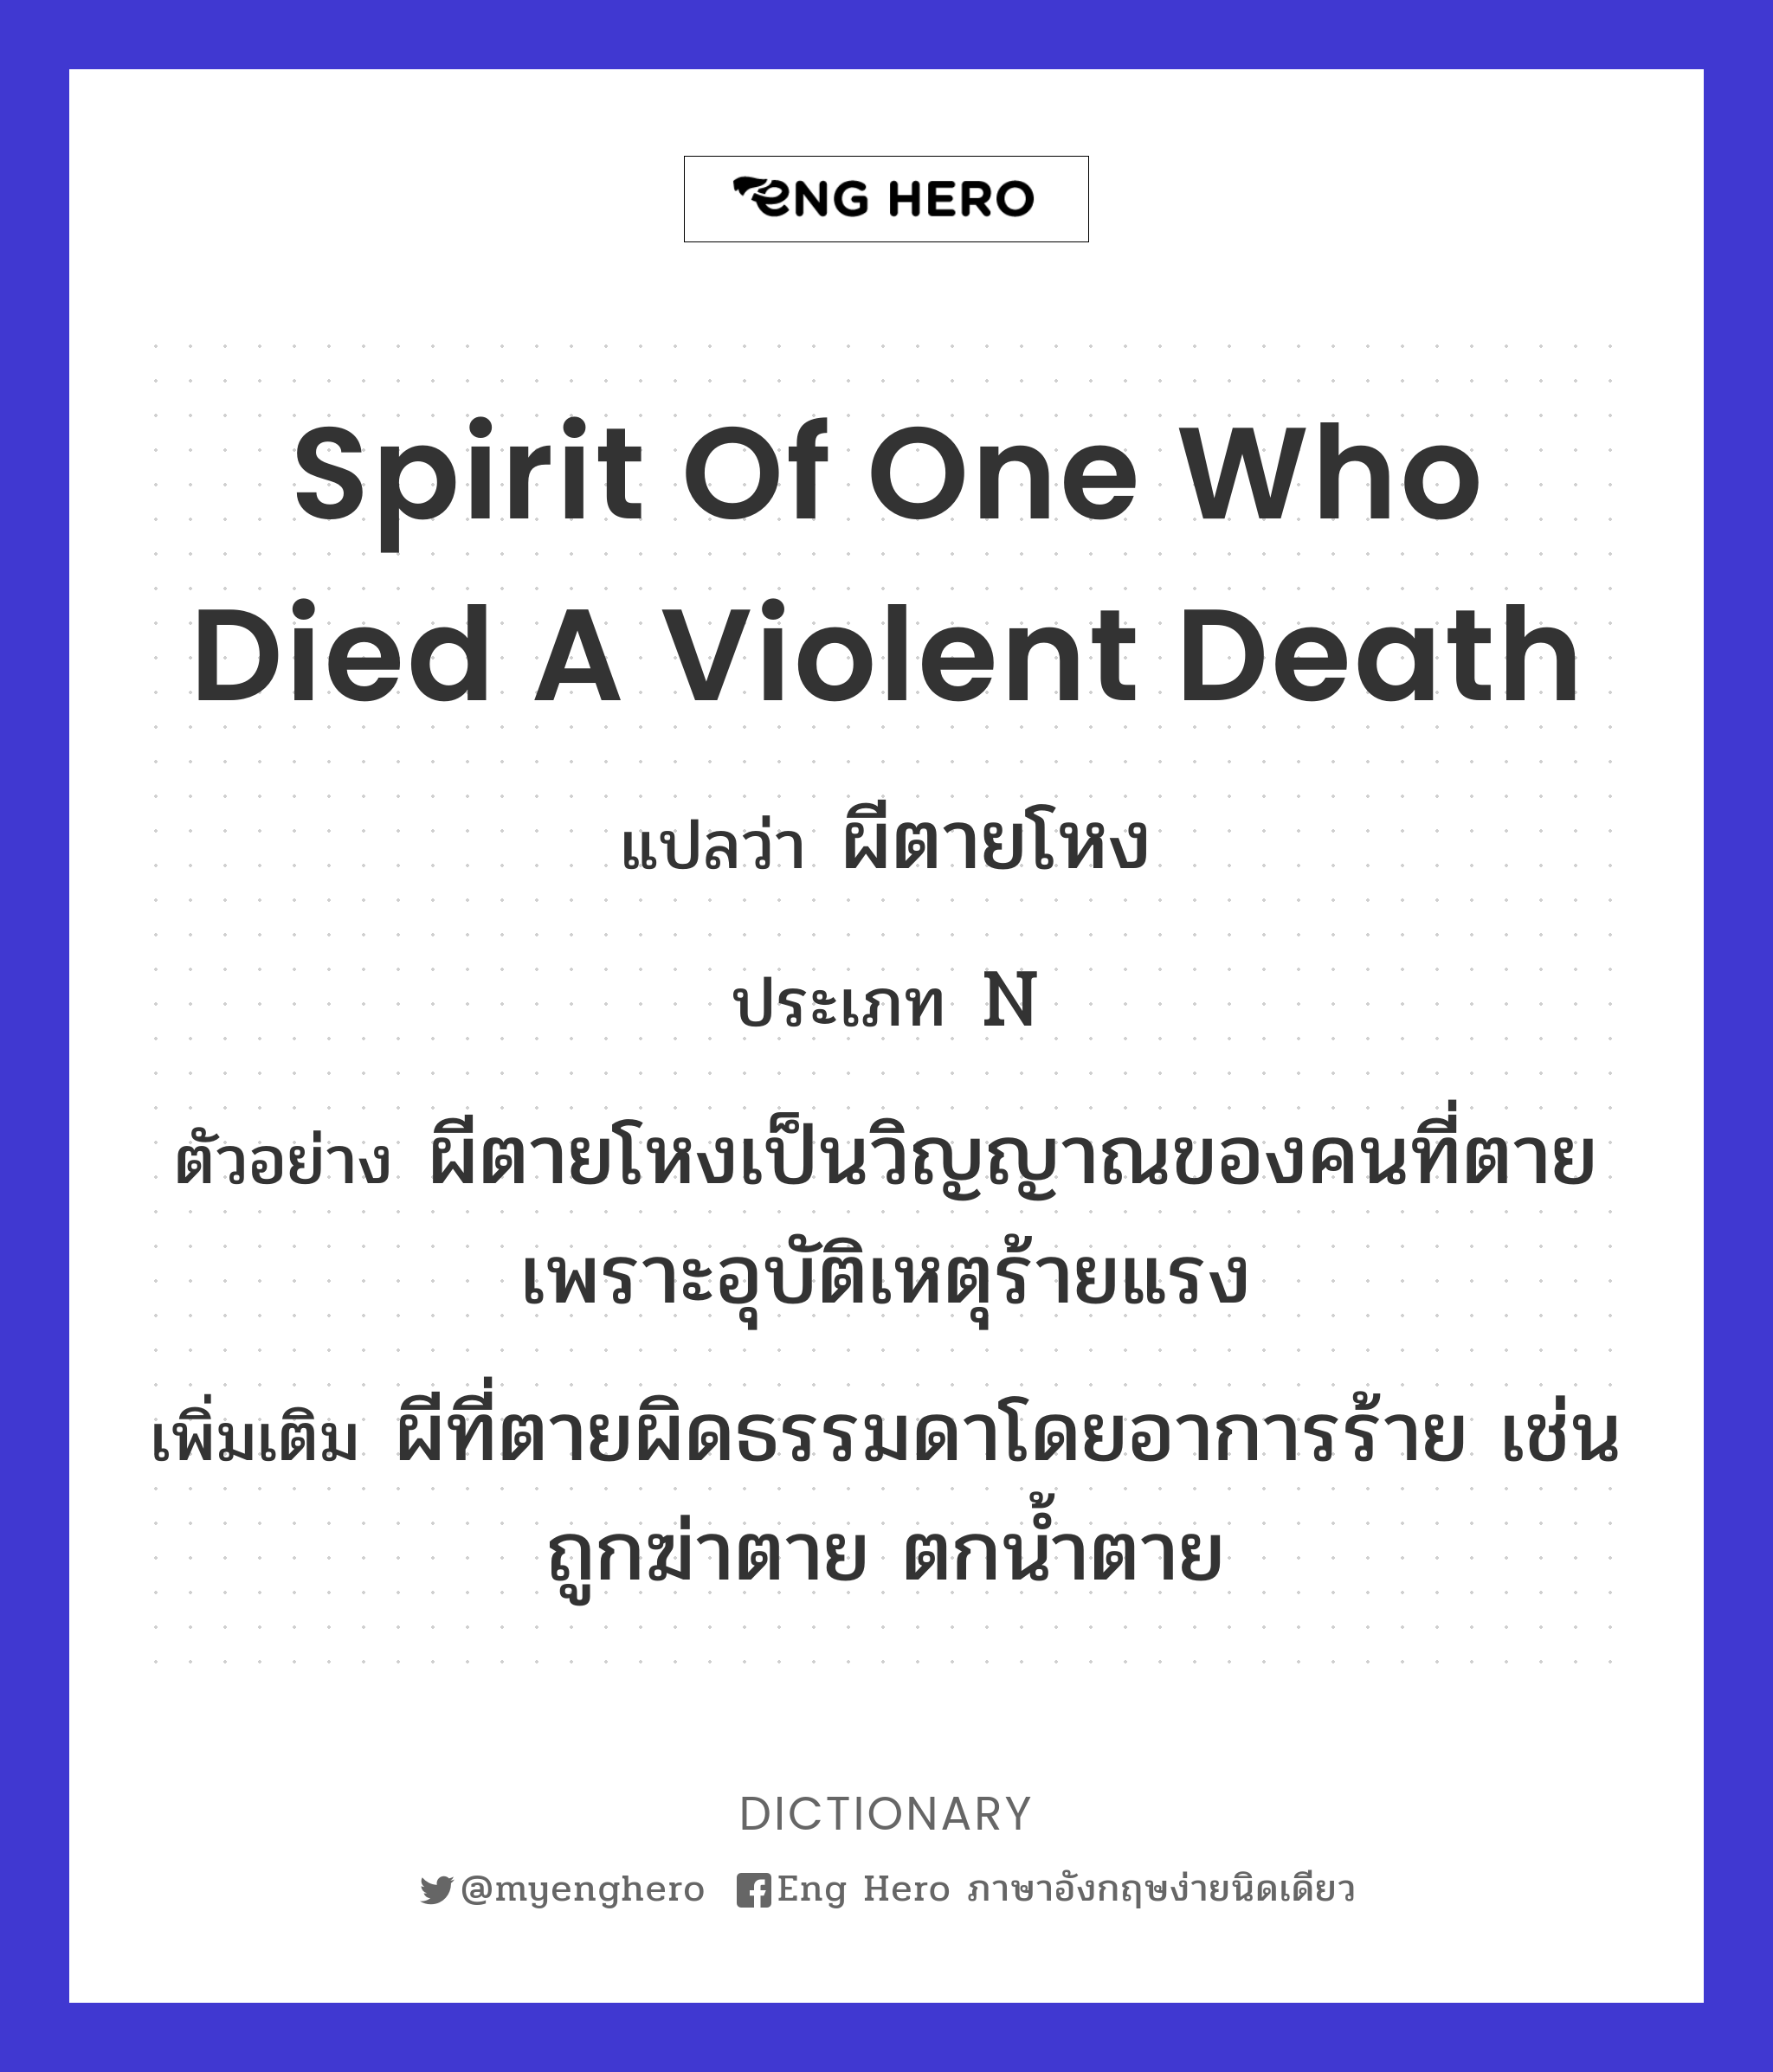 spirit of one who died a violent death